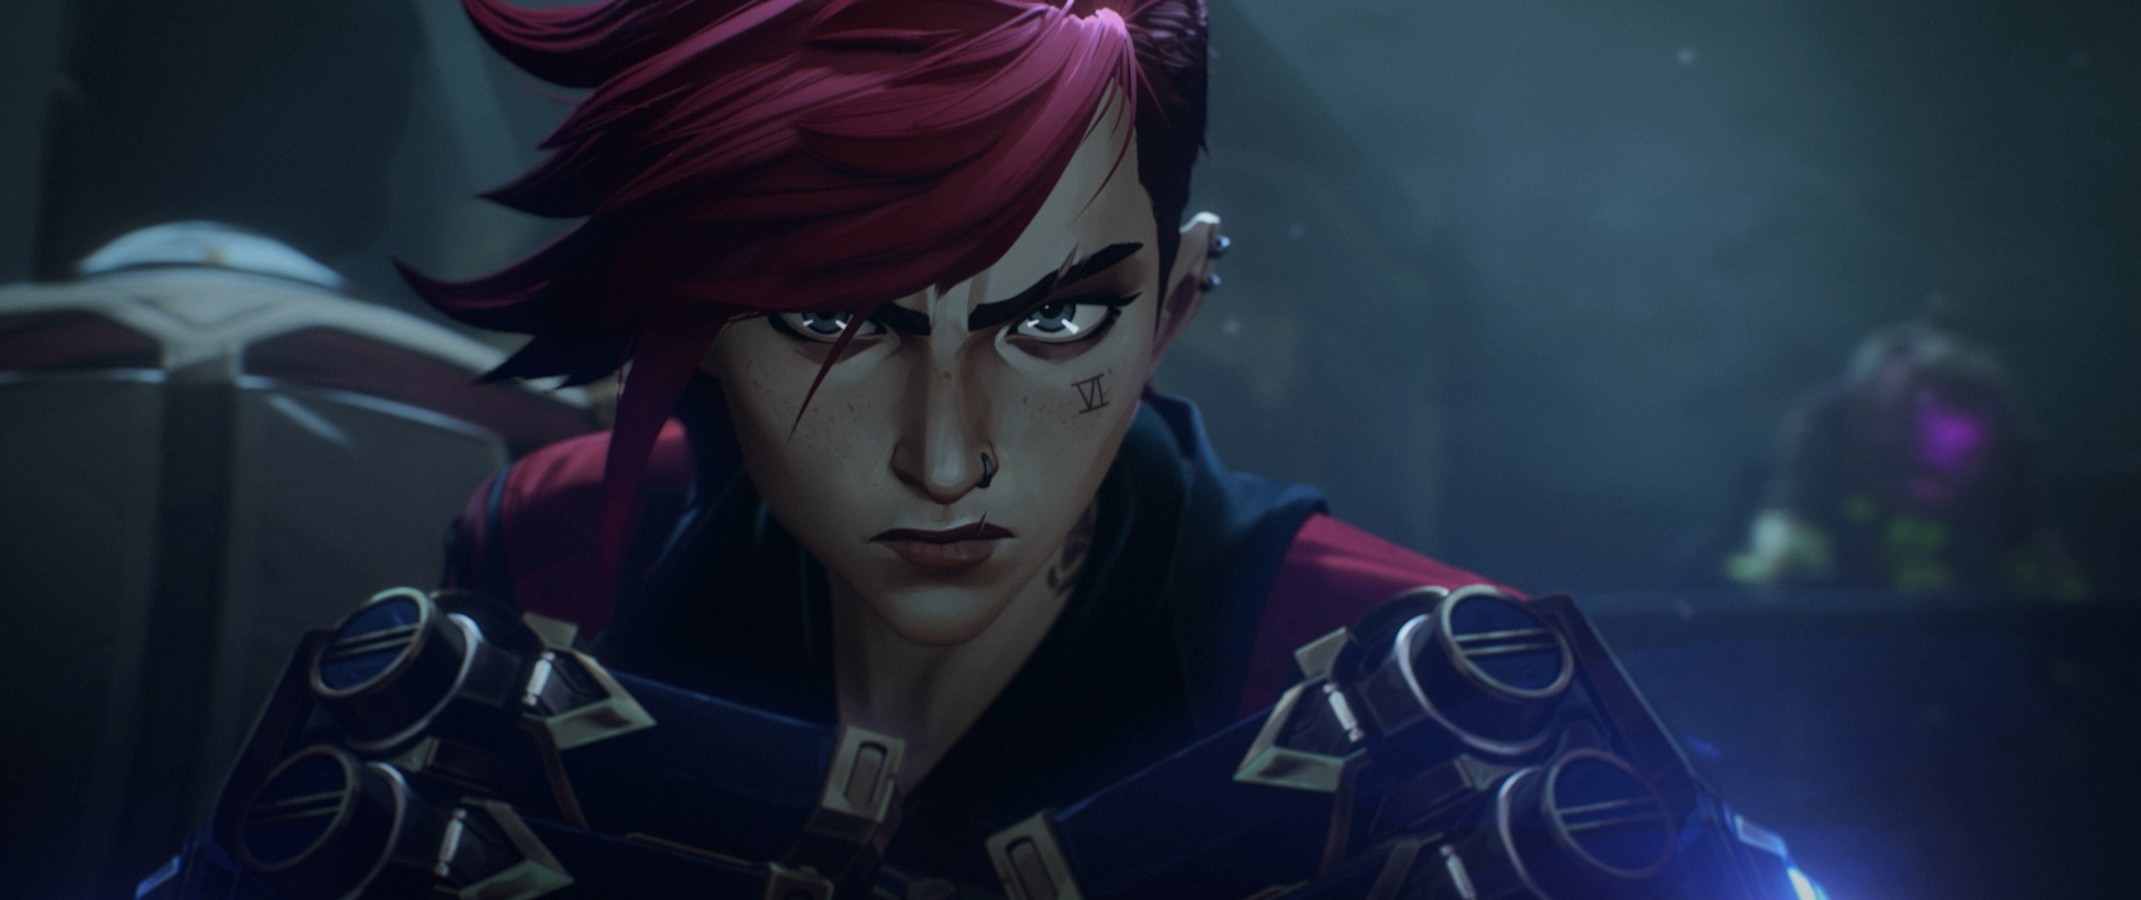 closeup of an animated character looking intense